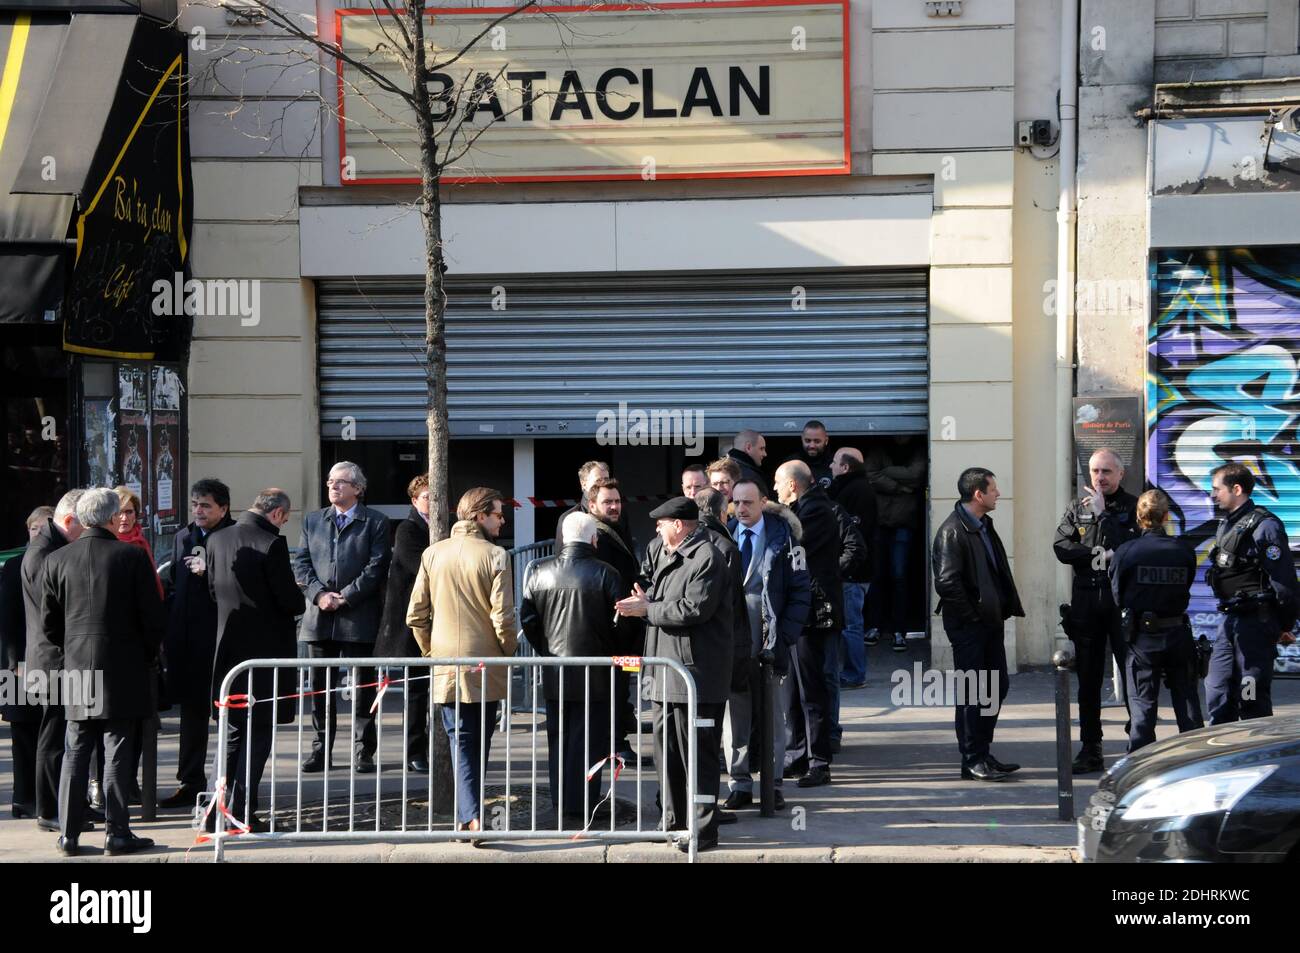 French parliamentary commission of enquiry into possible security failings over two major terror attacks in Paris in 2015, going into the Bataclan concert hall (seen behind) in Paris, France on March 17, 2016. Members of committee investigating government measures to fight terrorism were visiting the Bataclan concert hall on March 17, four months after a coordinated series of gun and bomb attacks at several sites in Paris on November 13, including the Bataclan concert hall, left 130 dead. Photo by Alain Apaydin/ABACAPRESS.COM Stock Photo